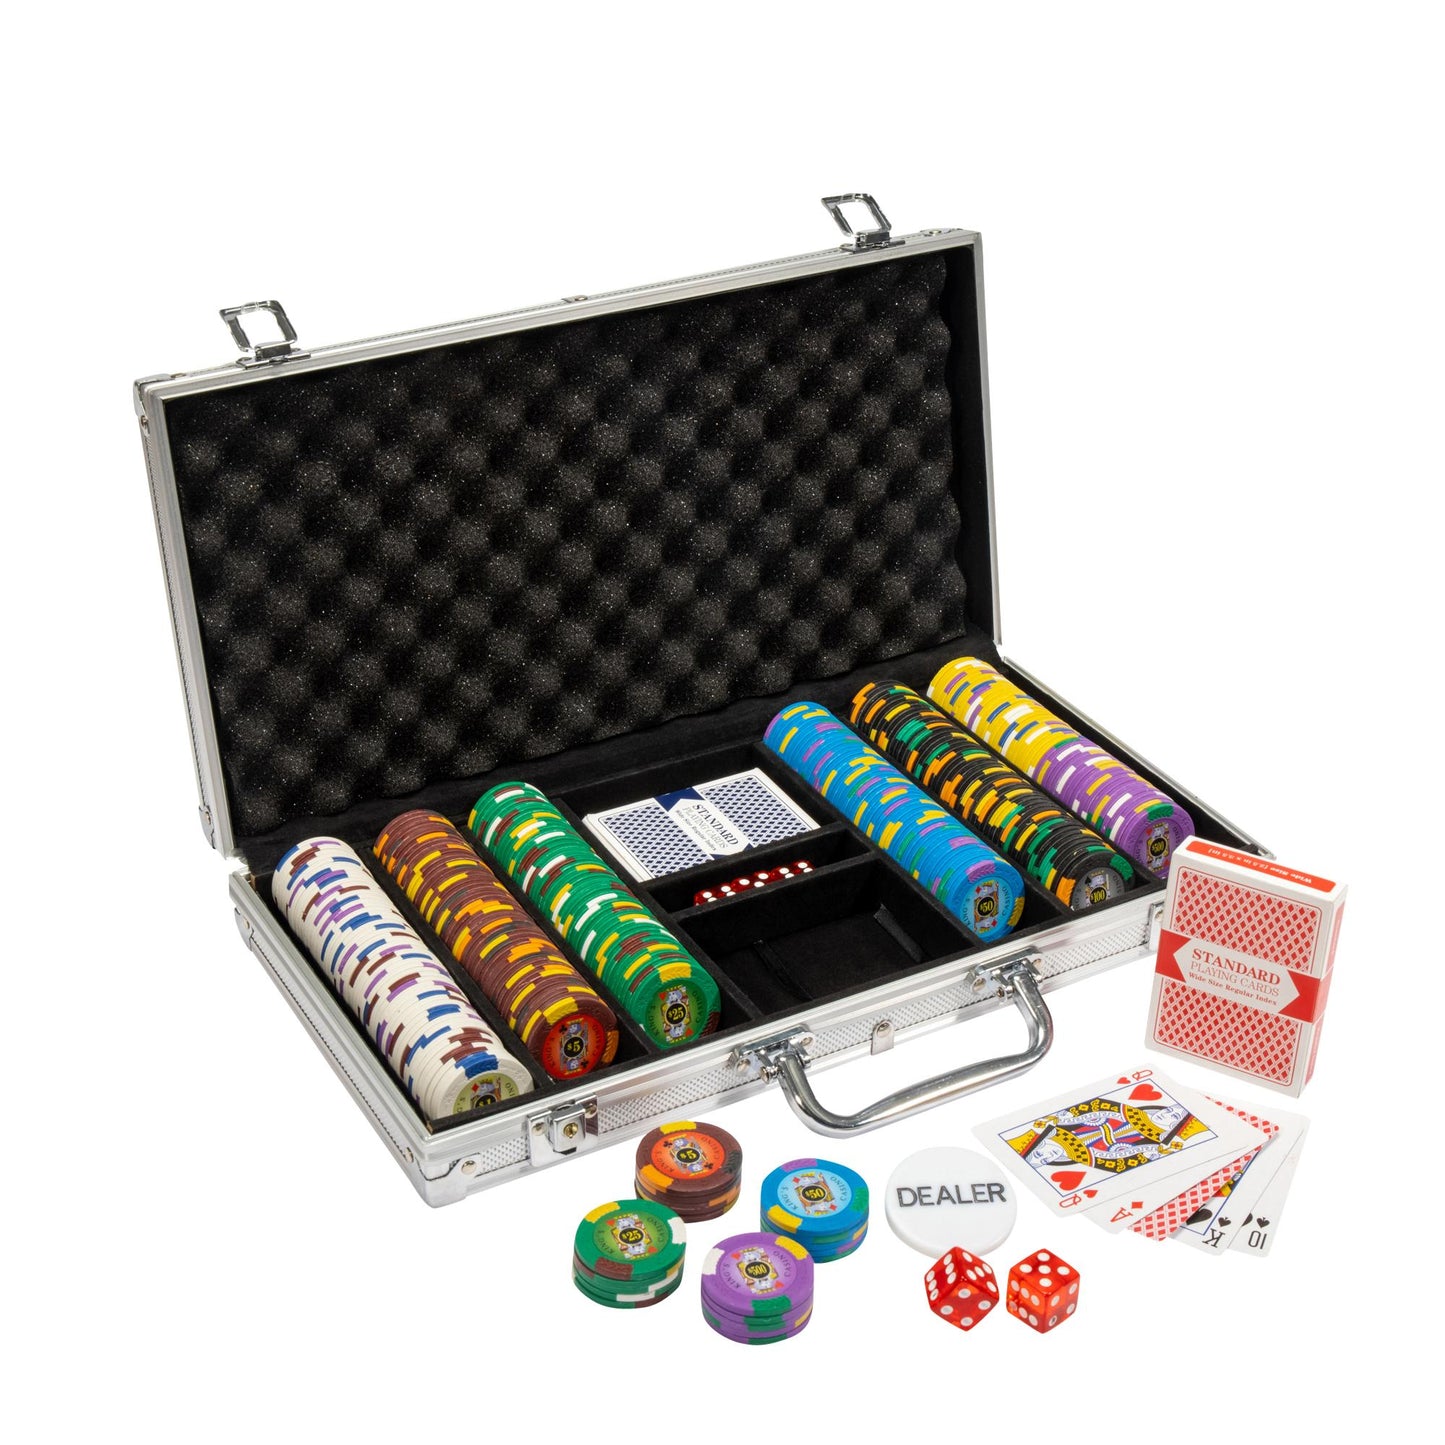 300 Kings Casino Poker Chips with Aluminum Case